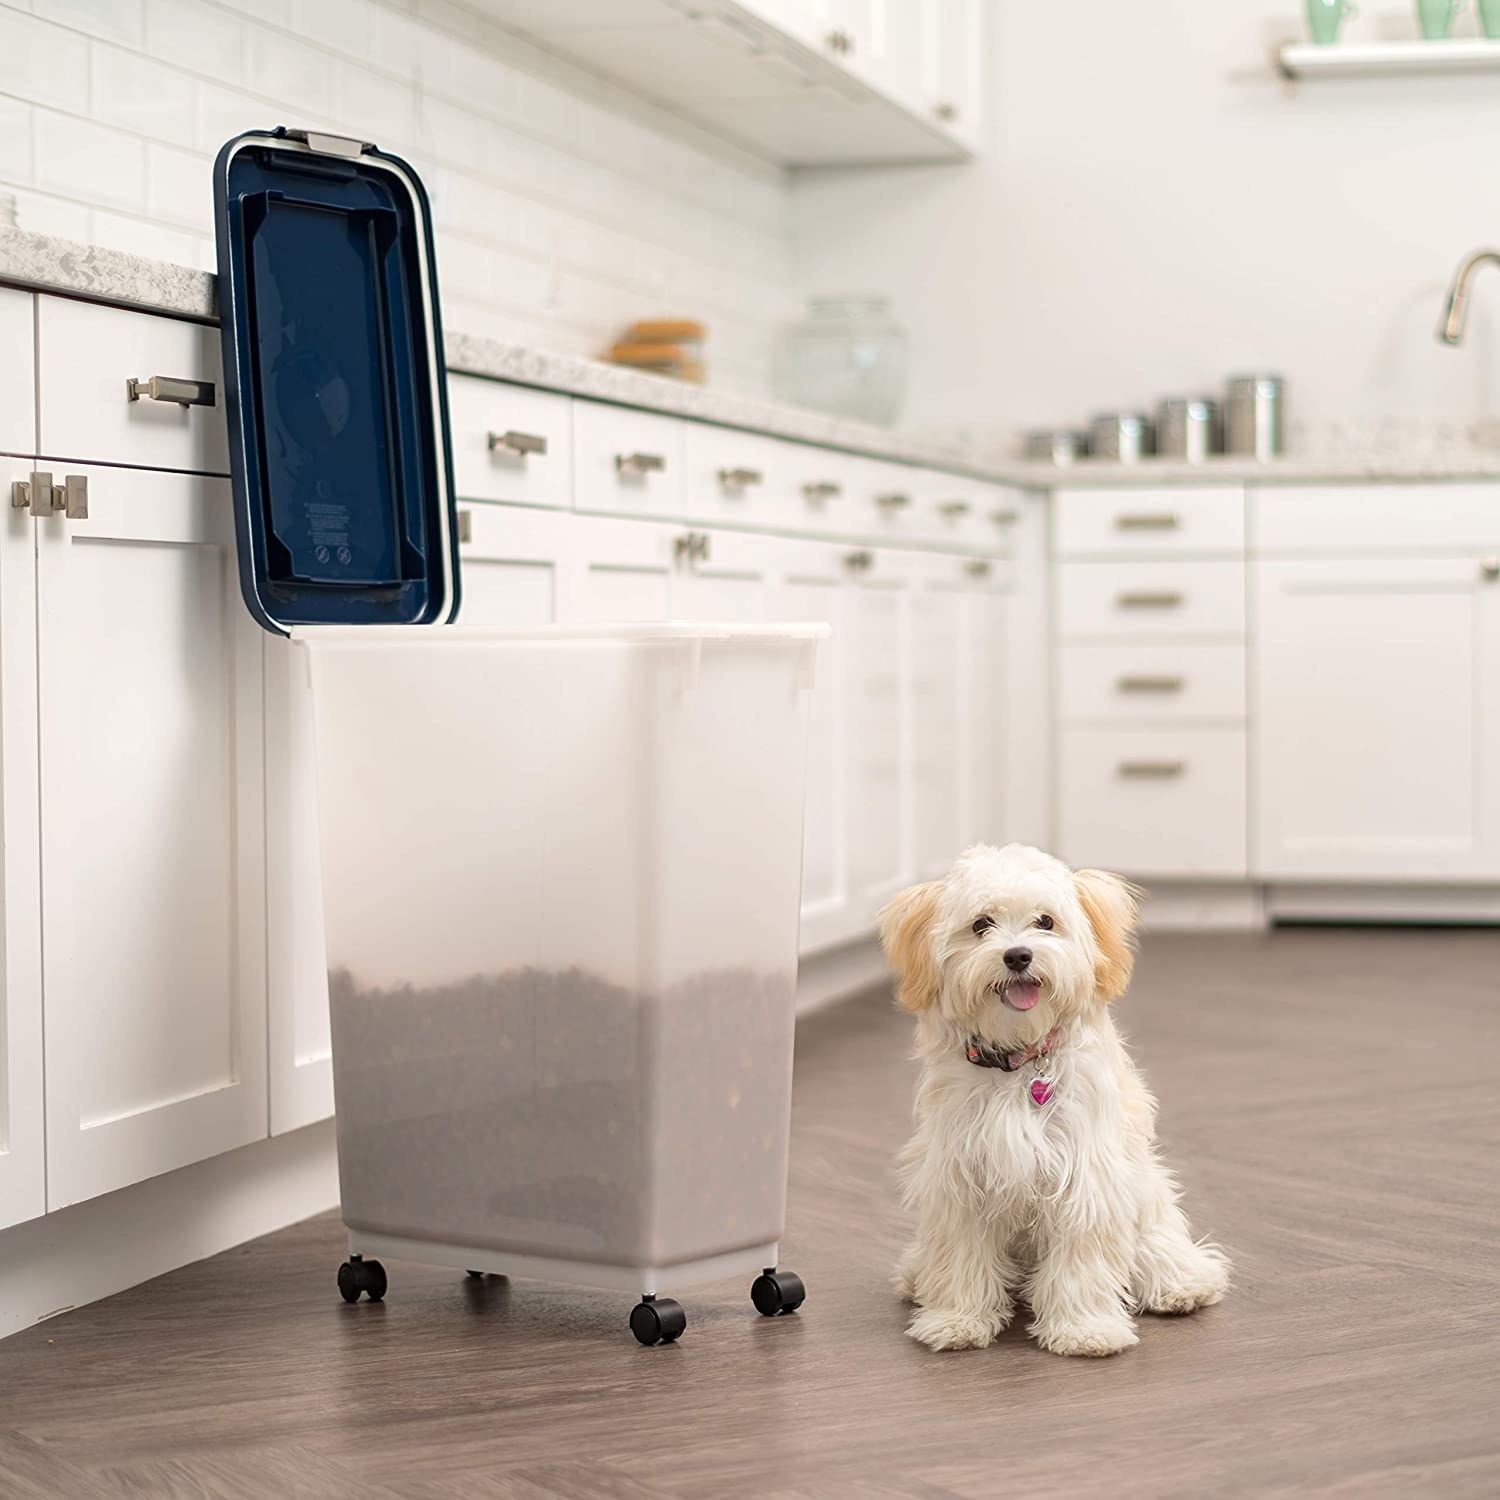 a cute dog next to the lidded container on casters